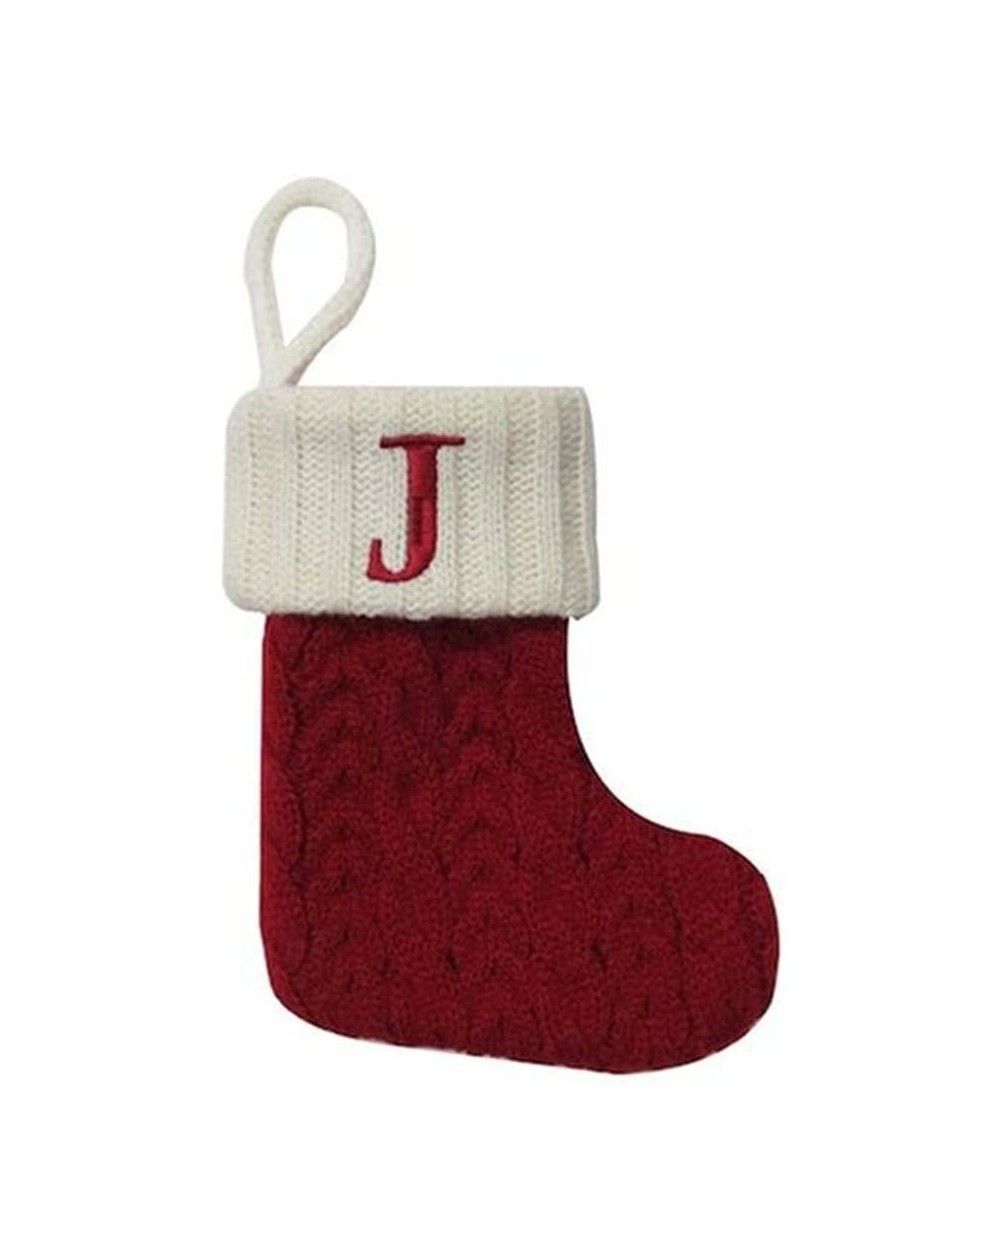 Stockings & Holders Mini Cable Knit Stocking-Letter J - CA188O2R999 $10.49